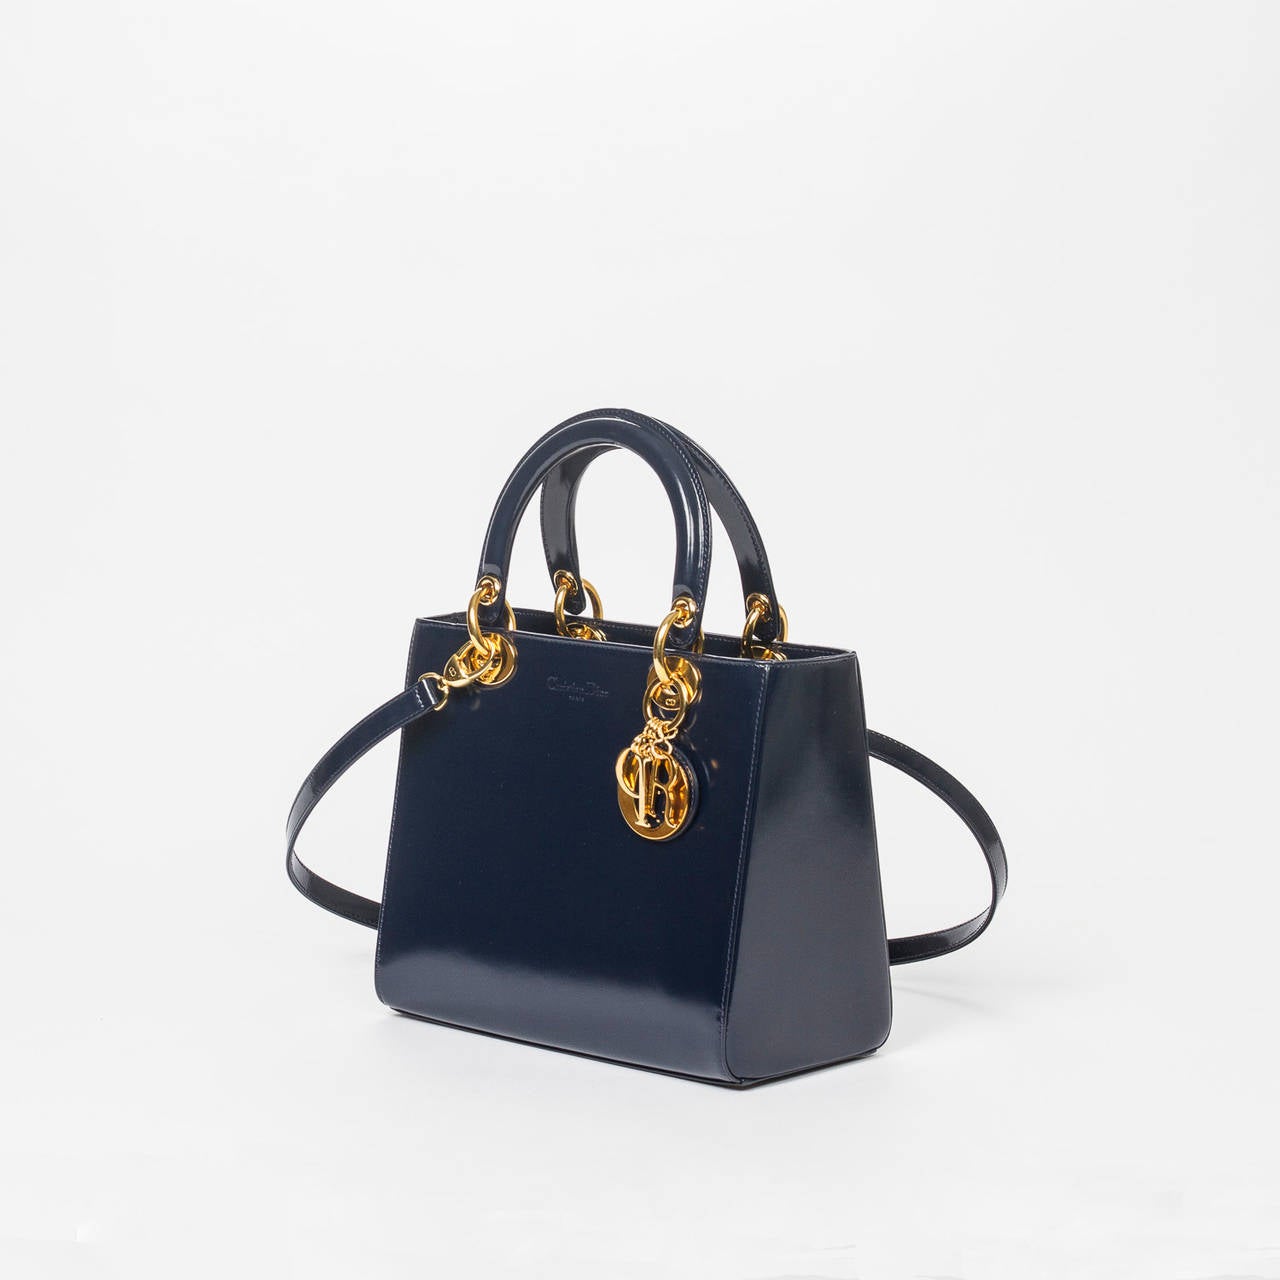 Lady PM in navy cuir glace with shoulder strap, gold tone hardware.